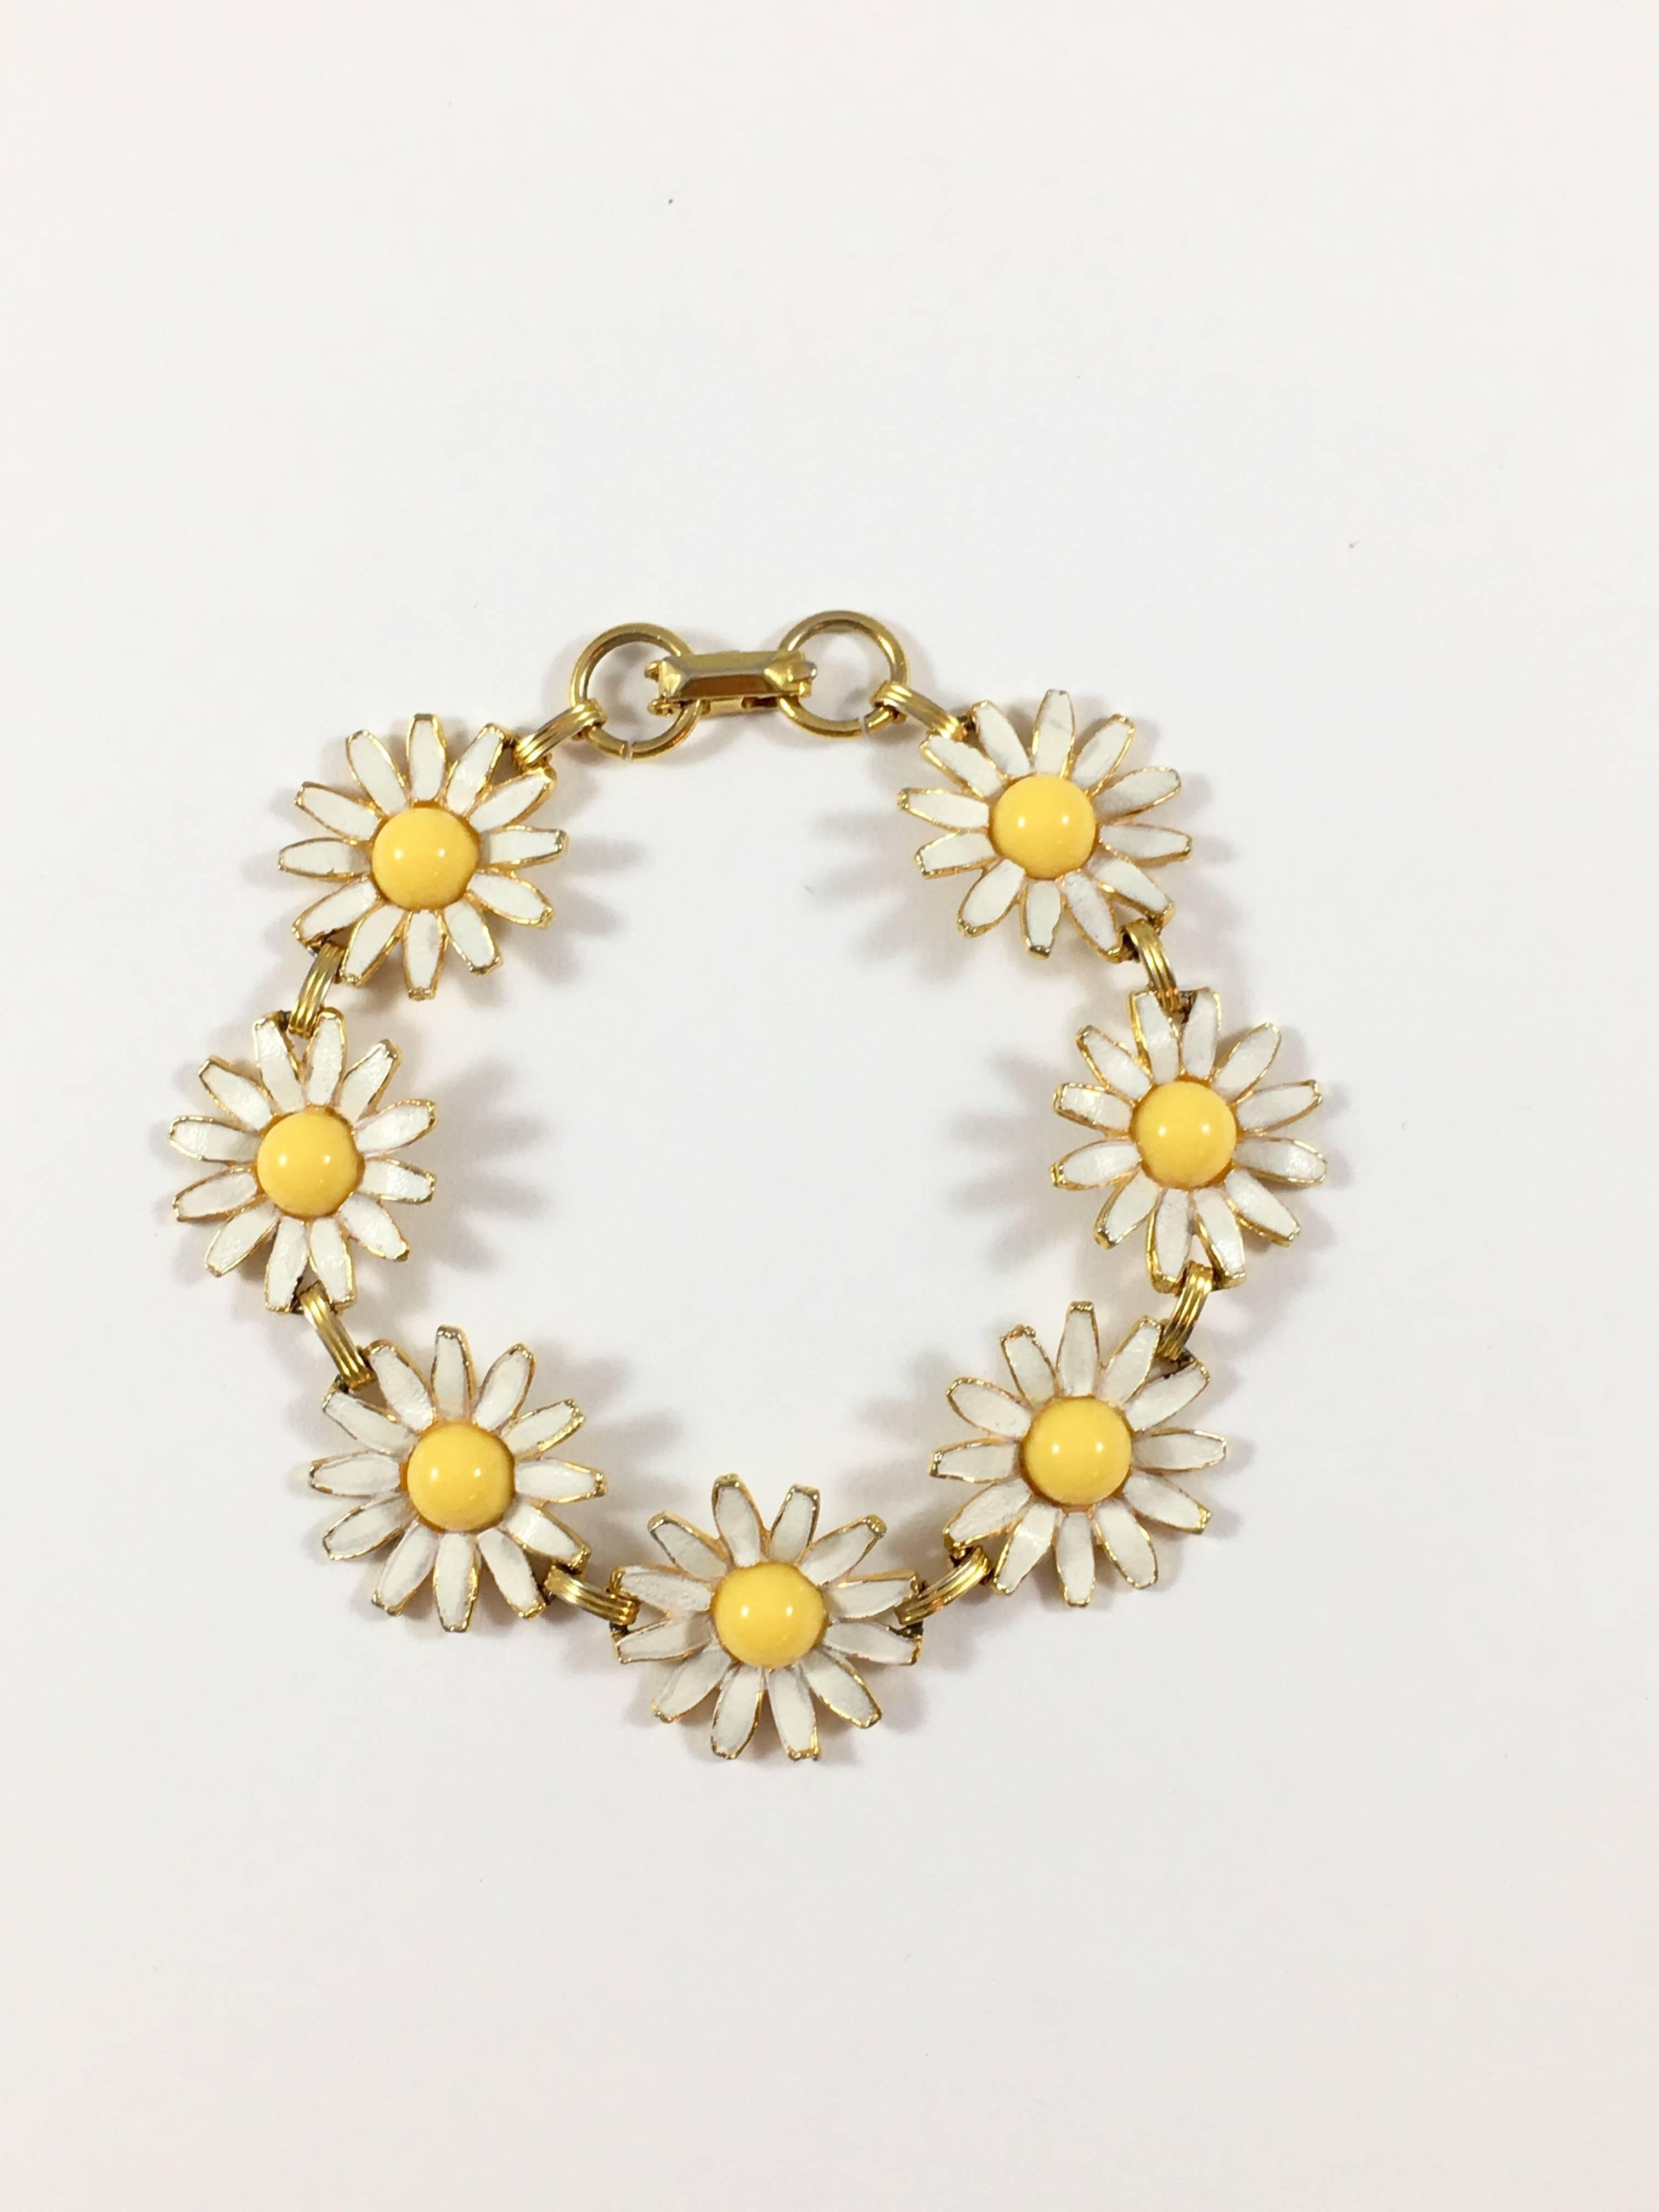 This is an adorable daisy bracelet from the 1960s. It is made out of a gold-toned material which has seven white enameled daisies with yellow resin centers. Each daisy is its own link. The bracelet is in excellent condition with only slight wear to